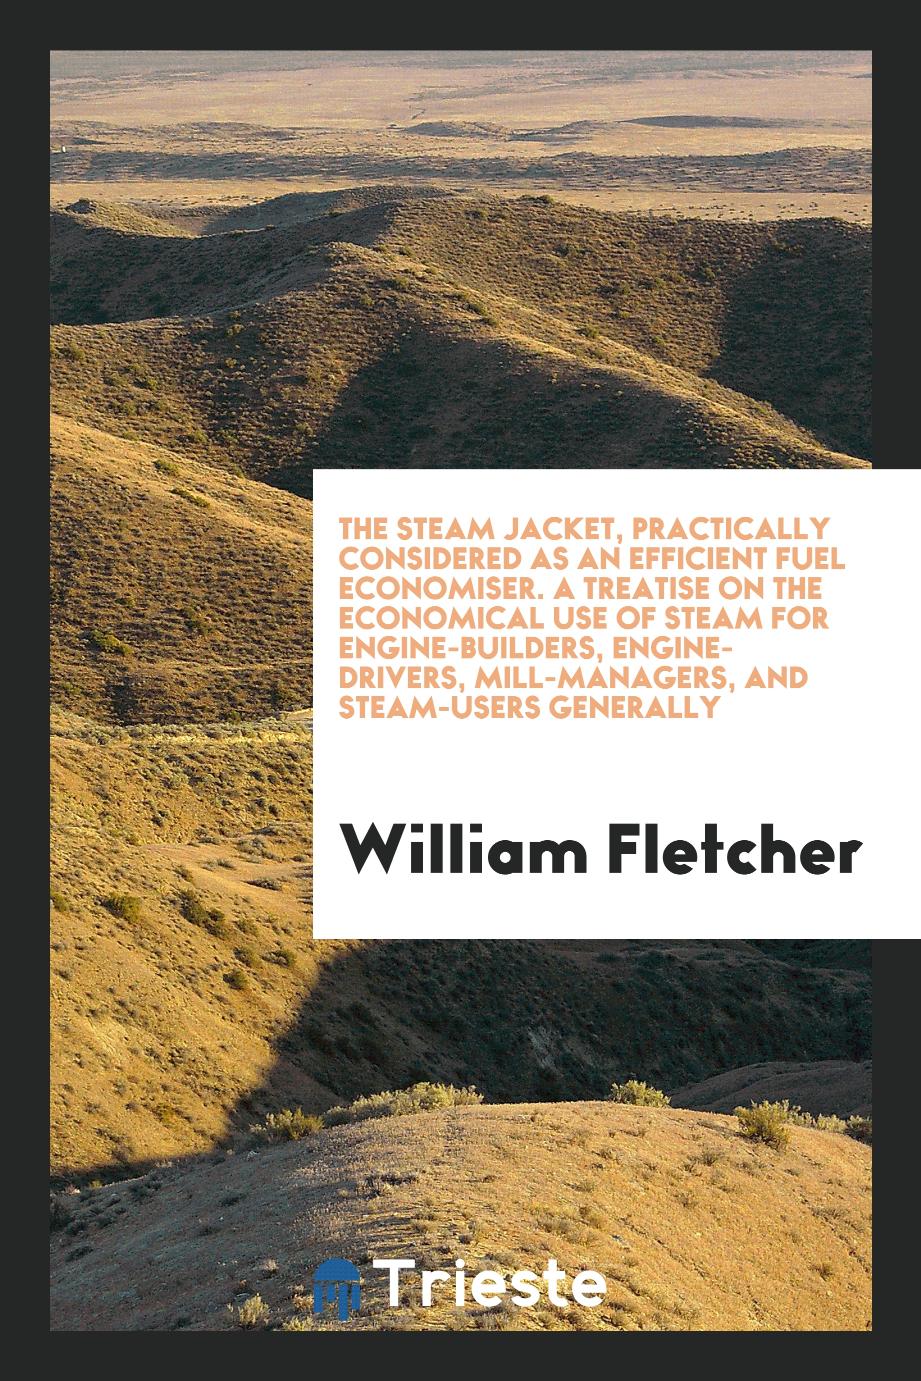 The steam jacket, practically considered as an efficient fuel economiser. A treatise on the economical use of steam for engine-builders, engine-drivers, mill-managers, and steam-users generally